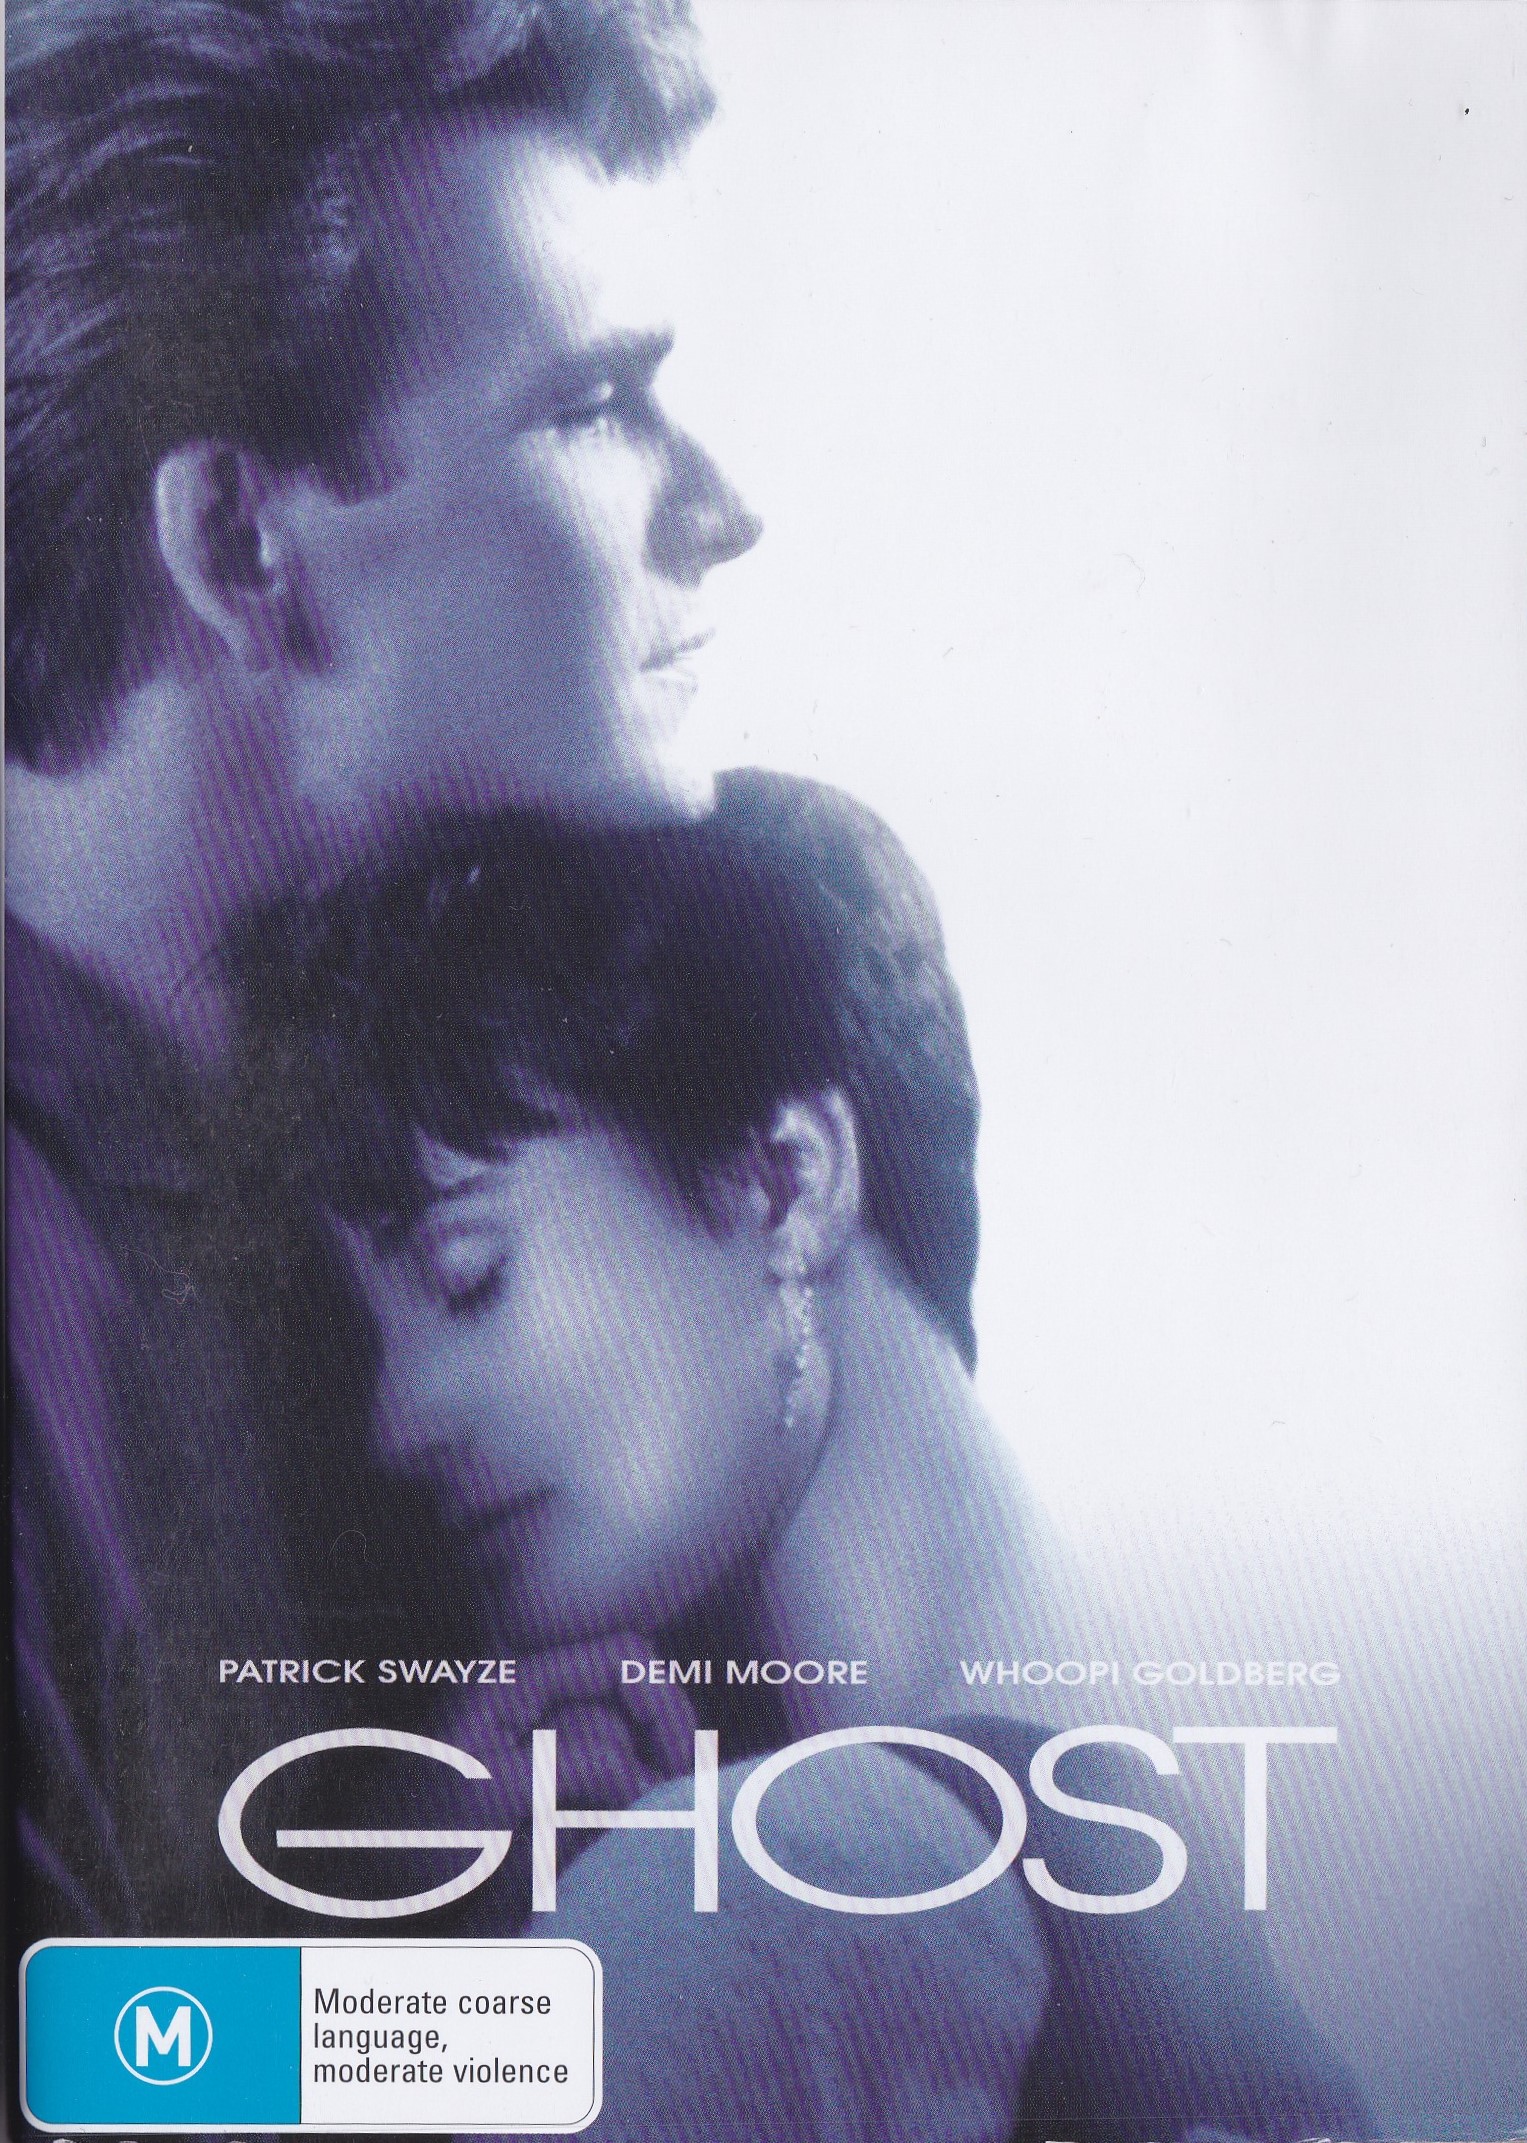 ghost patrick swayze and demi moore full movie